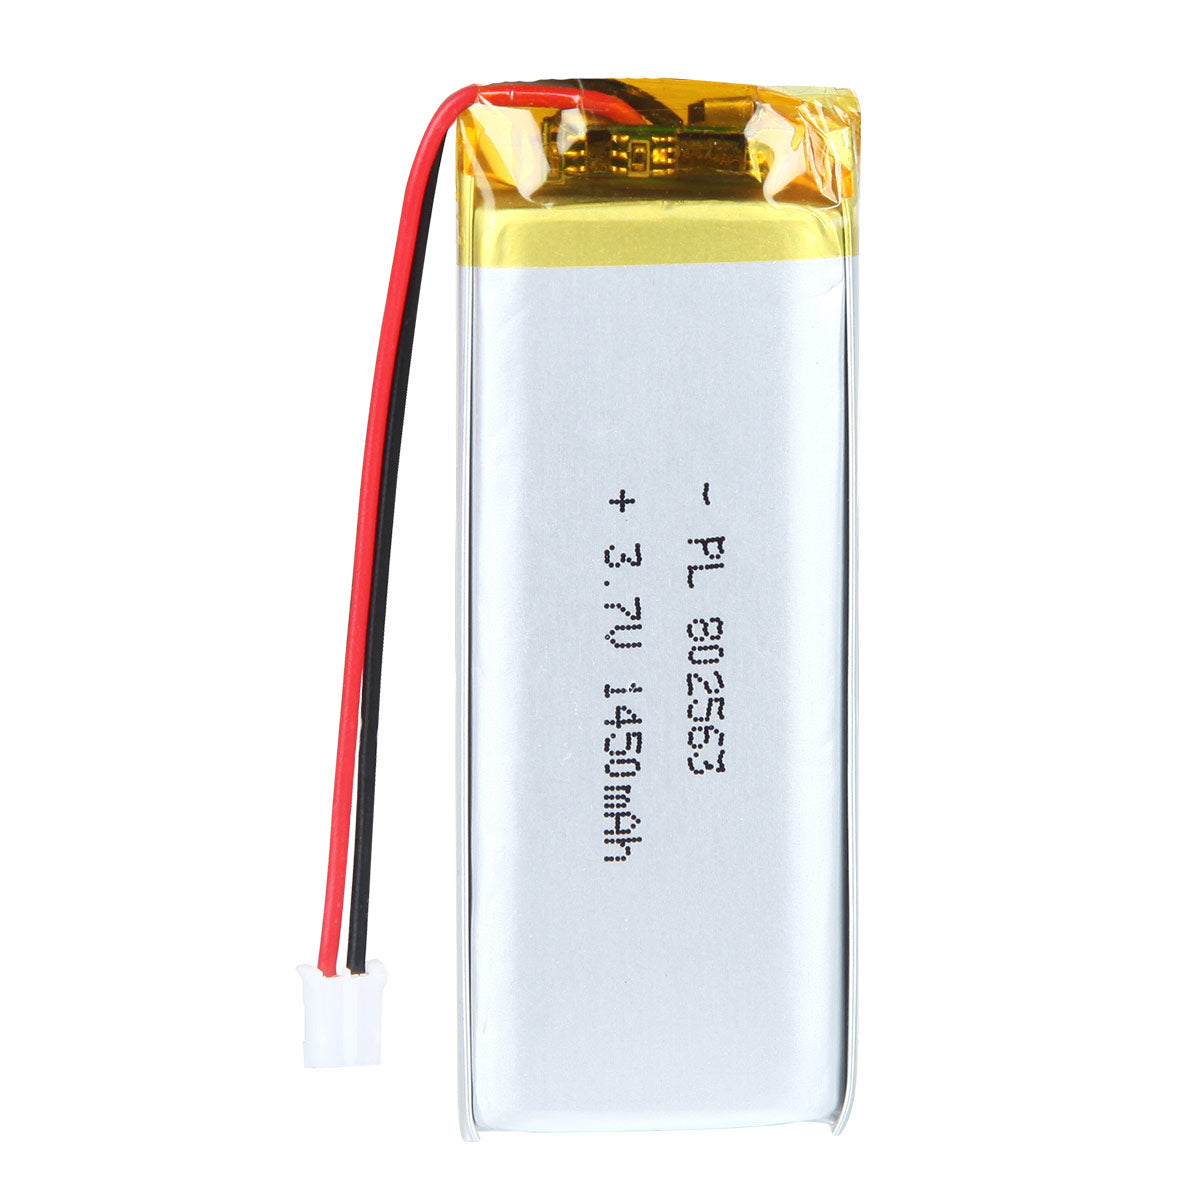 YDL 3.7V 1450mAh 802563 Rechargeable Lithium Polymer Battery